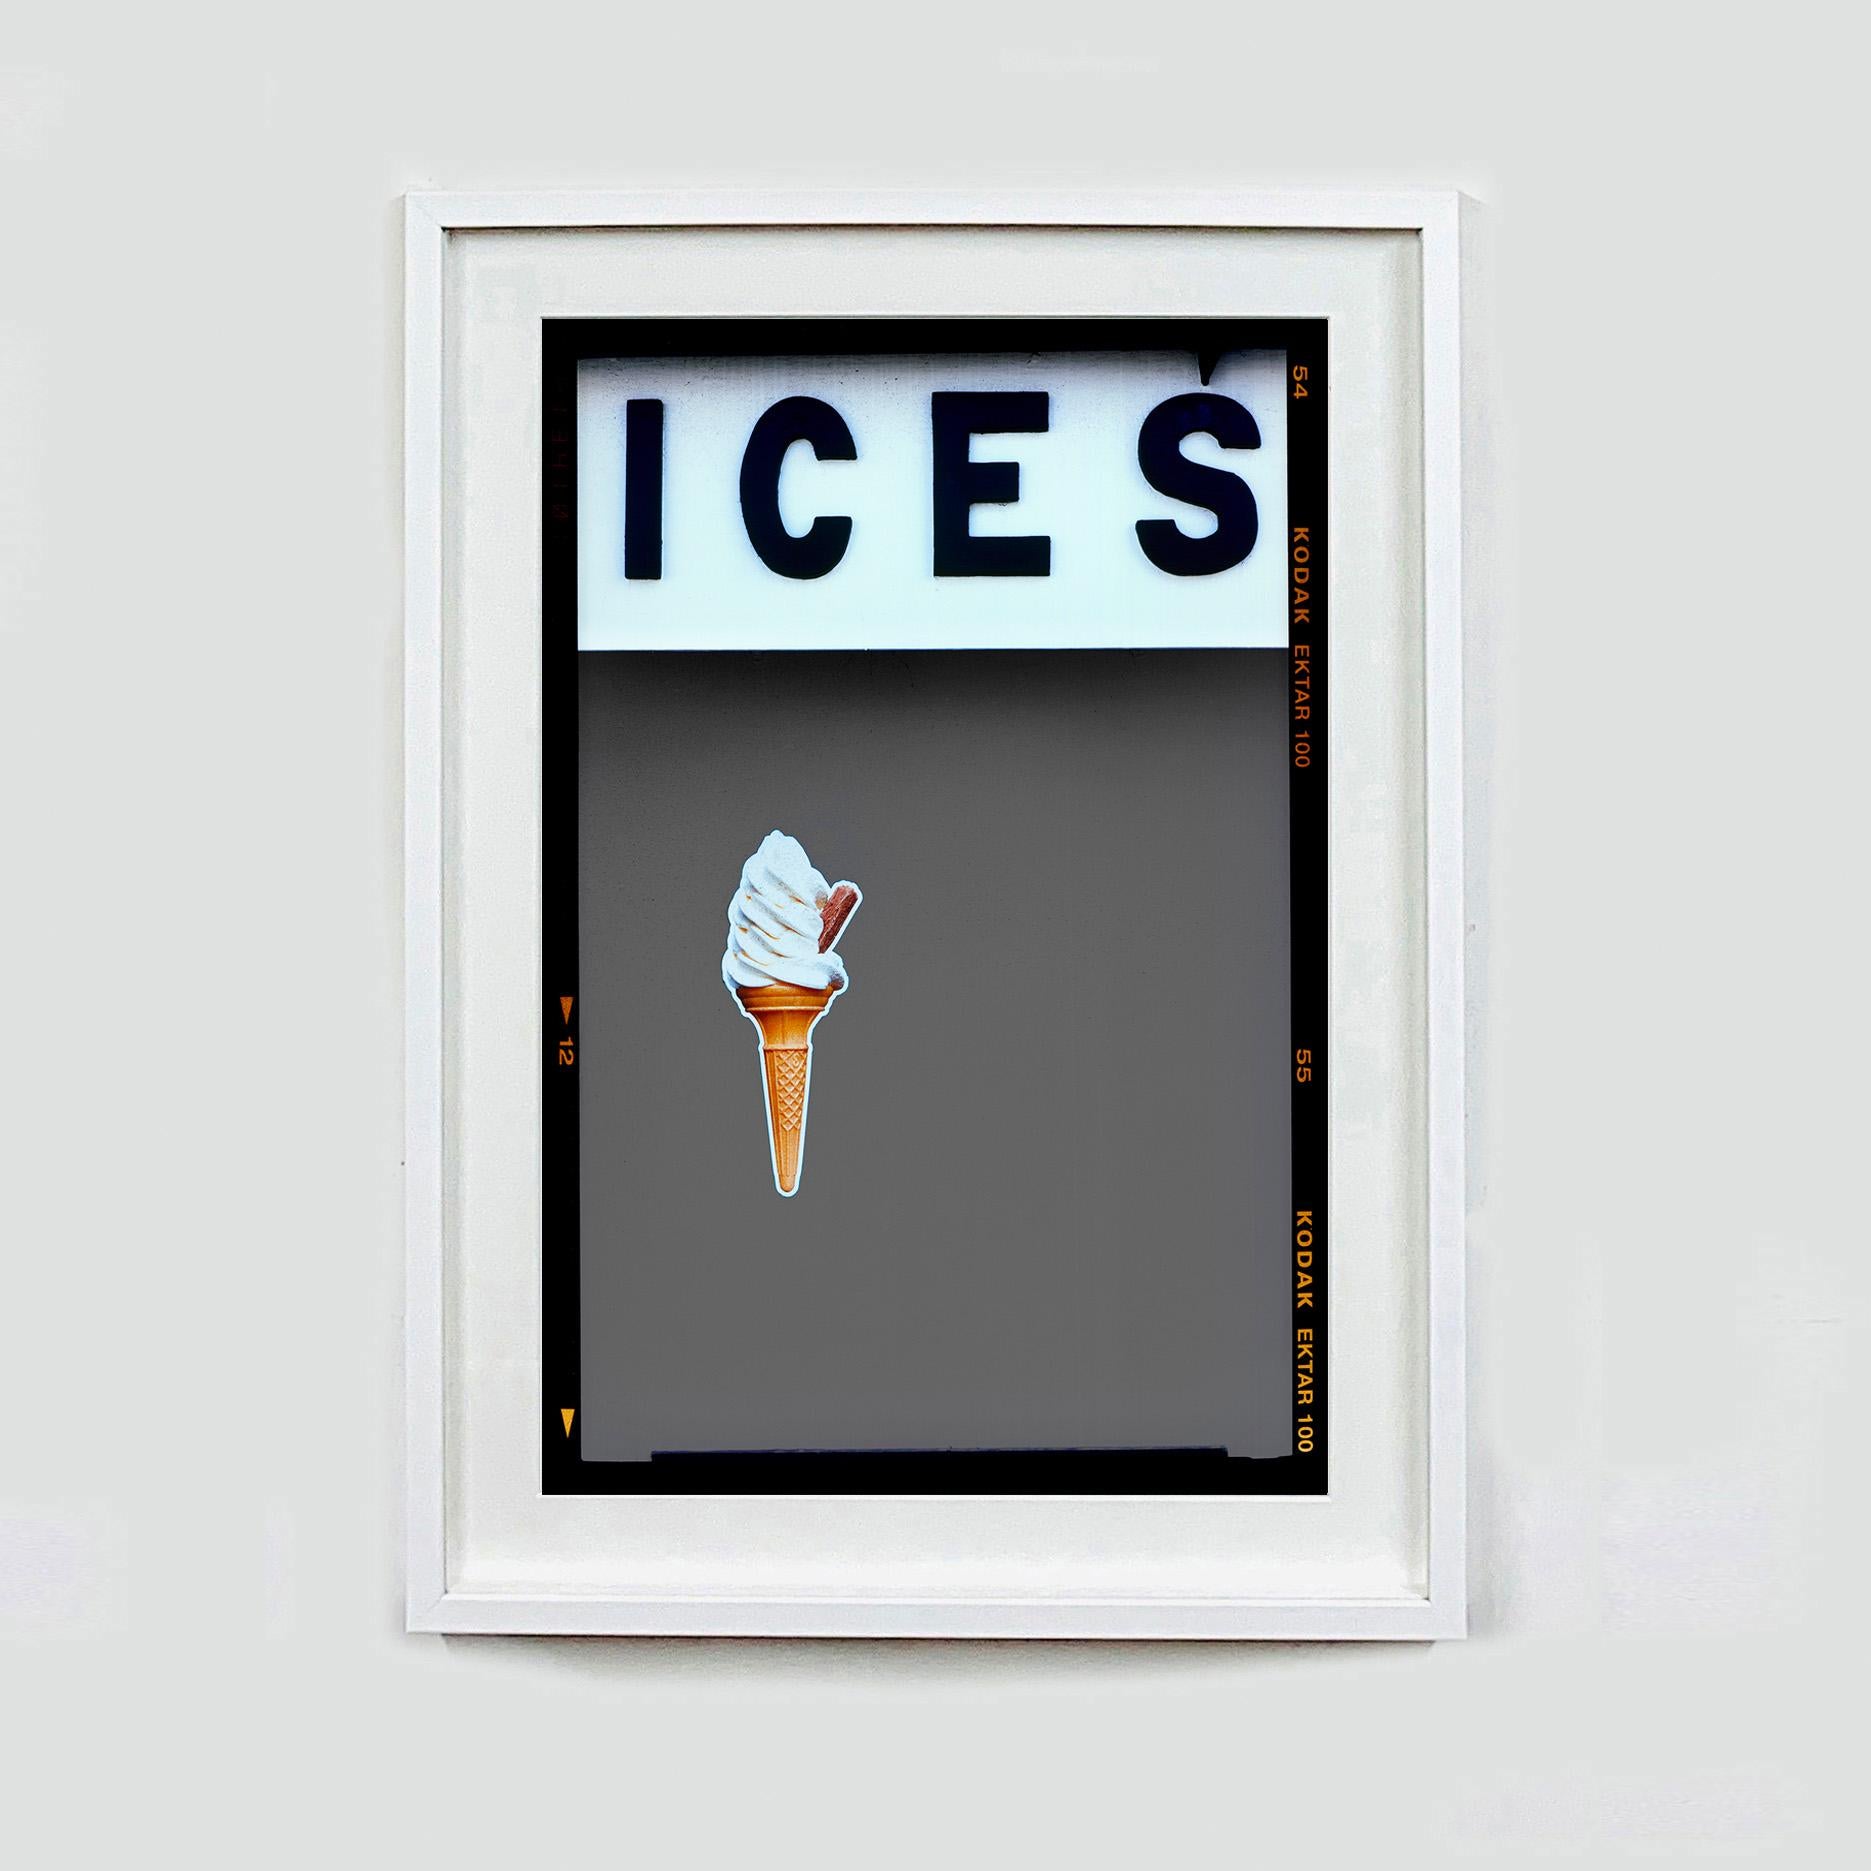 Ices (Grey), Bexhill-on-Sea - British seaside color photography - Contemporary Photograph by Richard Heeps